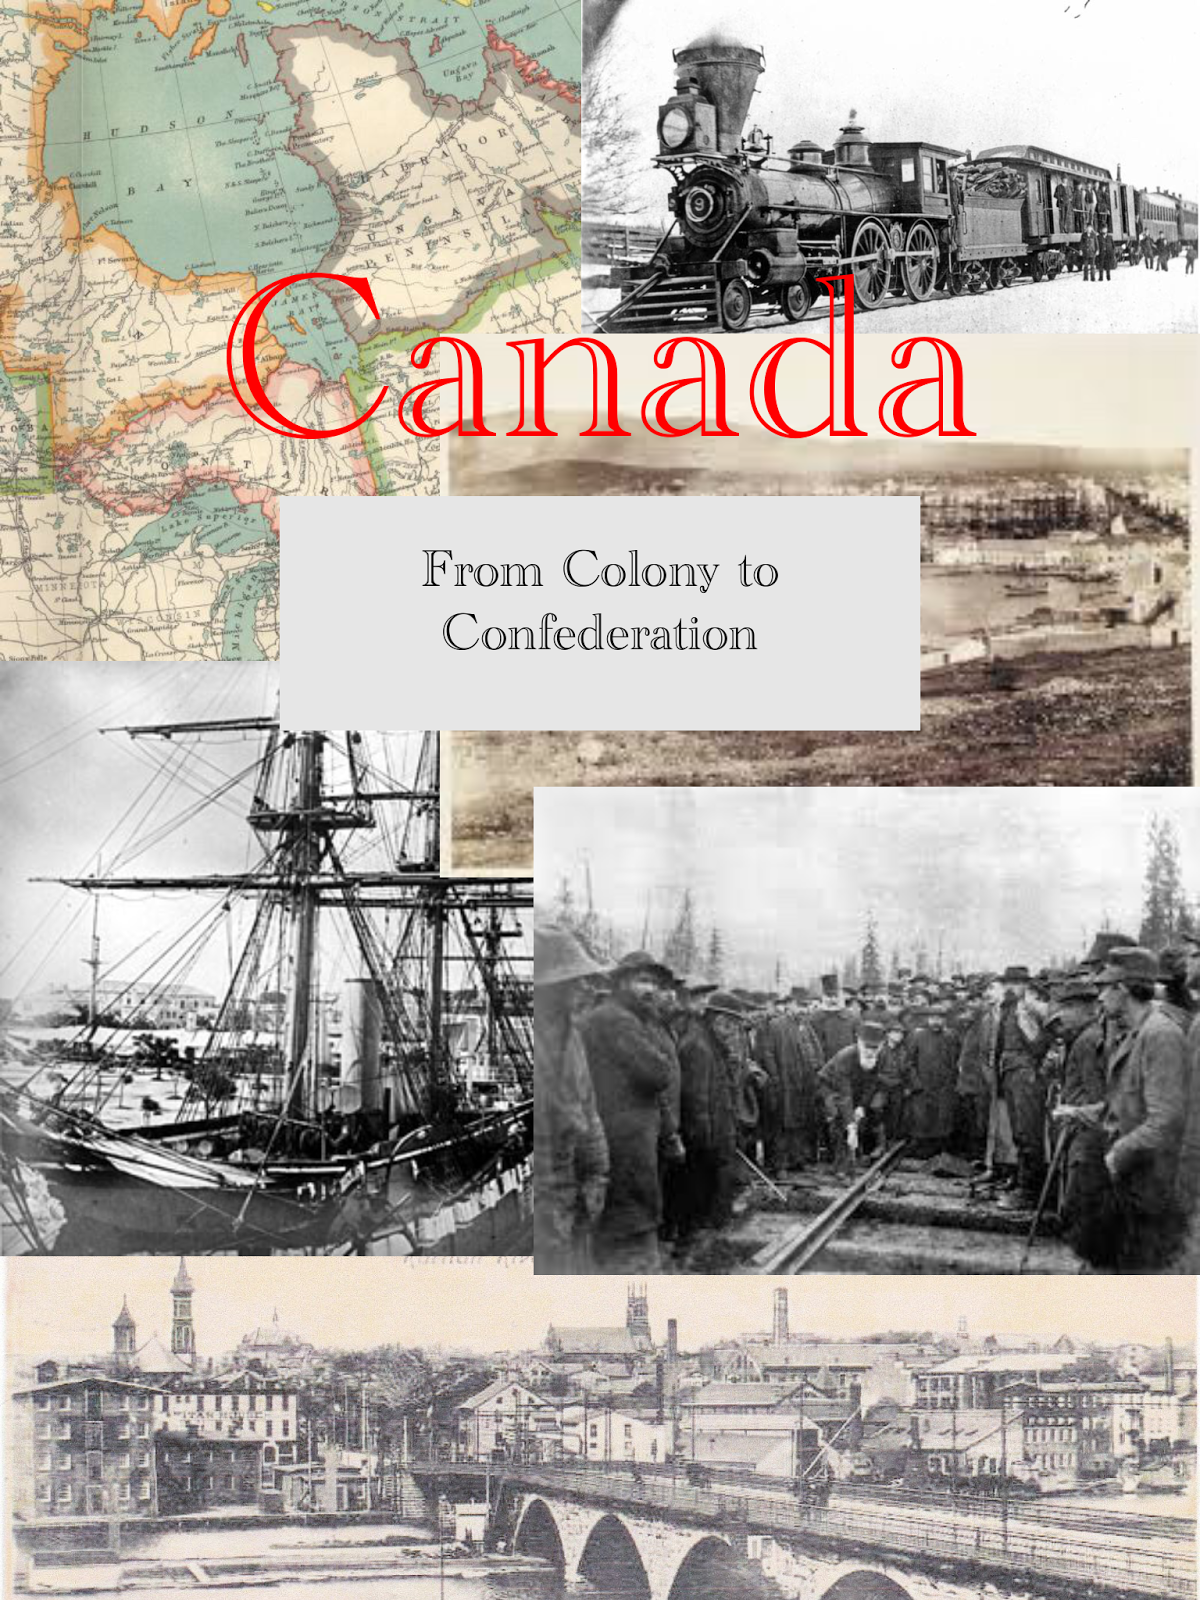 Canada: From Colony to Confederation